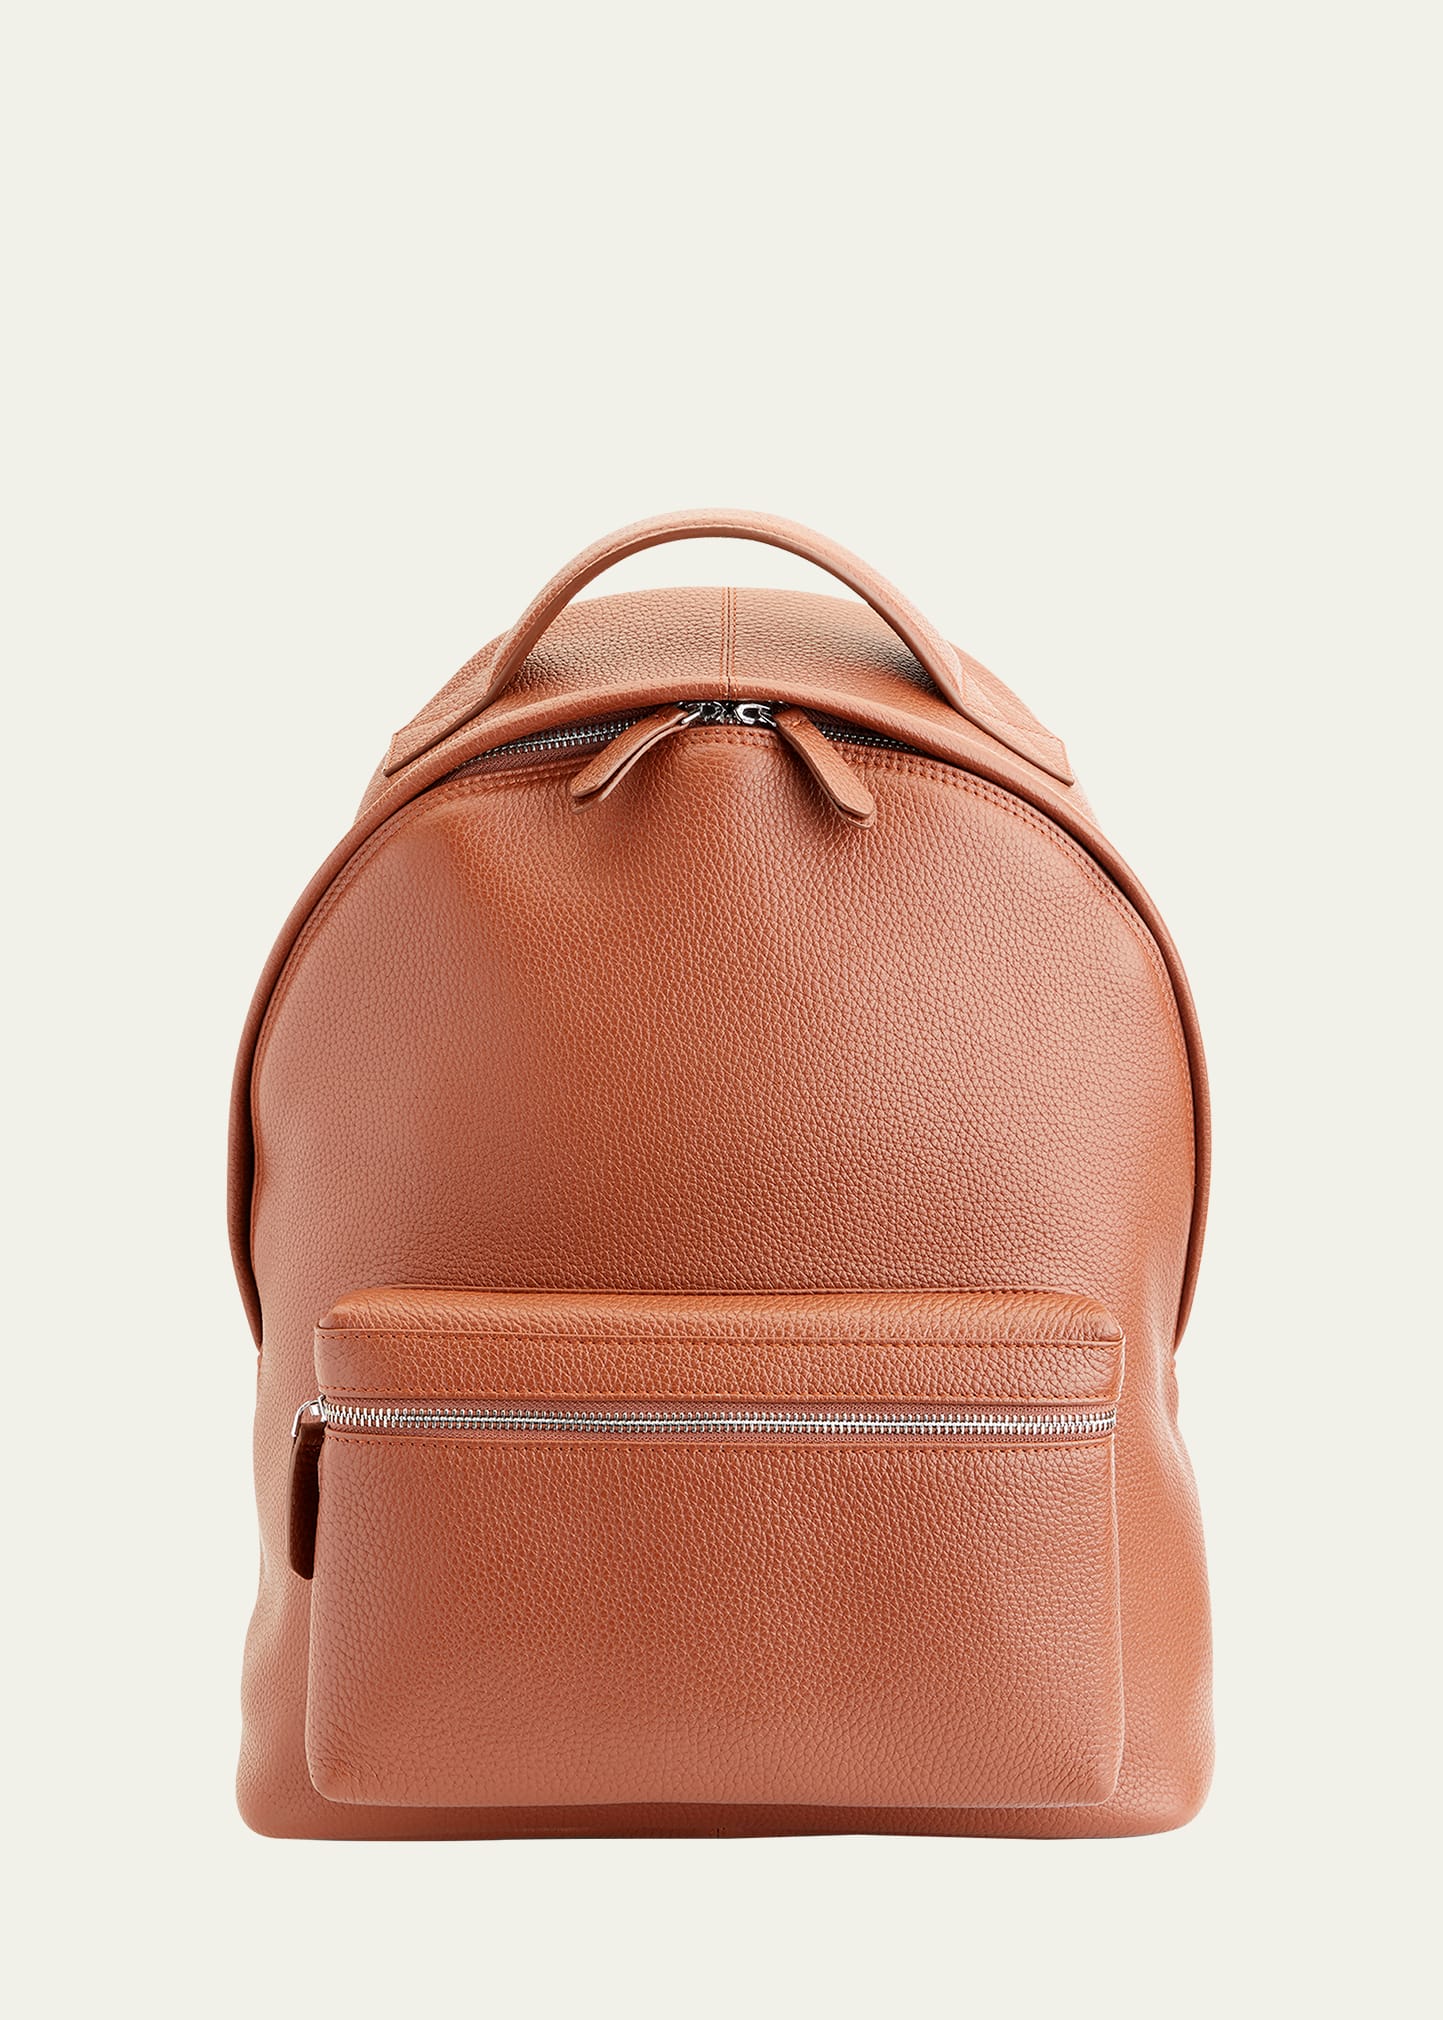 Royce New York Personalized Leather Executive Backpack In Tan